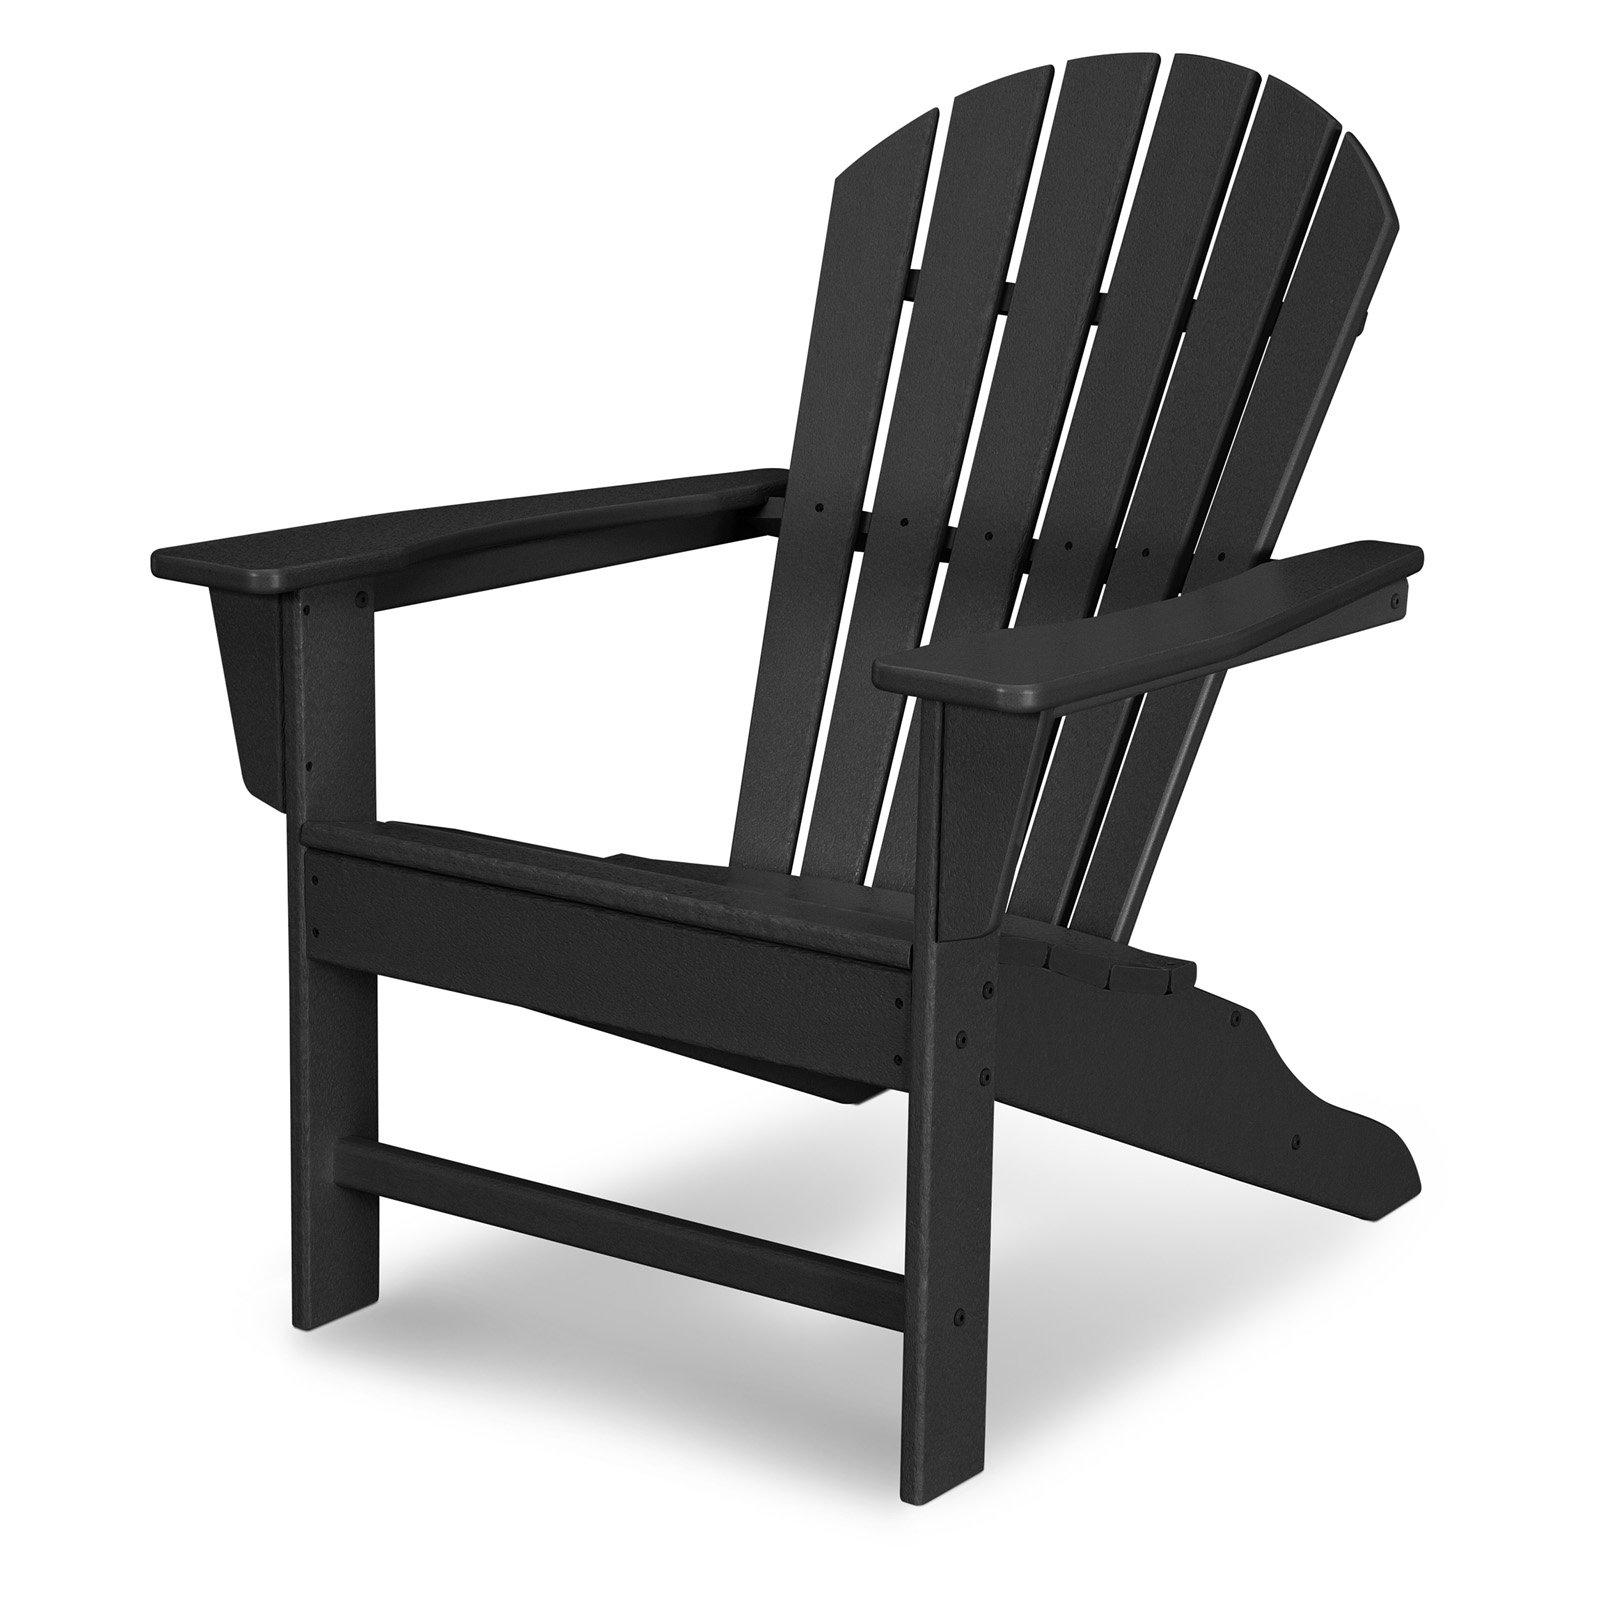 POLYWOOD&reg; South Beach Recycled Plastic Adirondack Chair - image 1 of 11